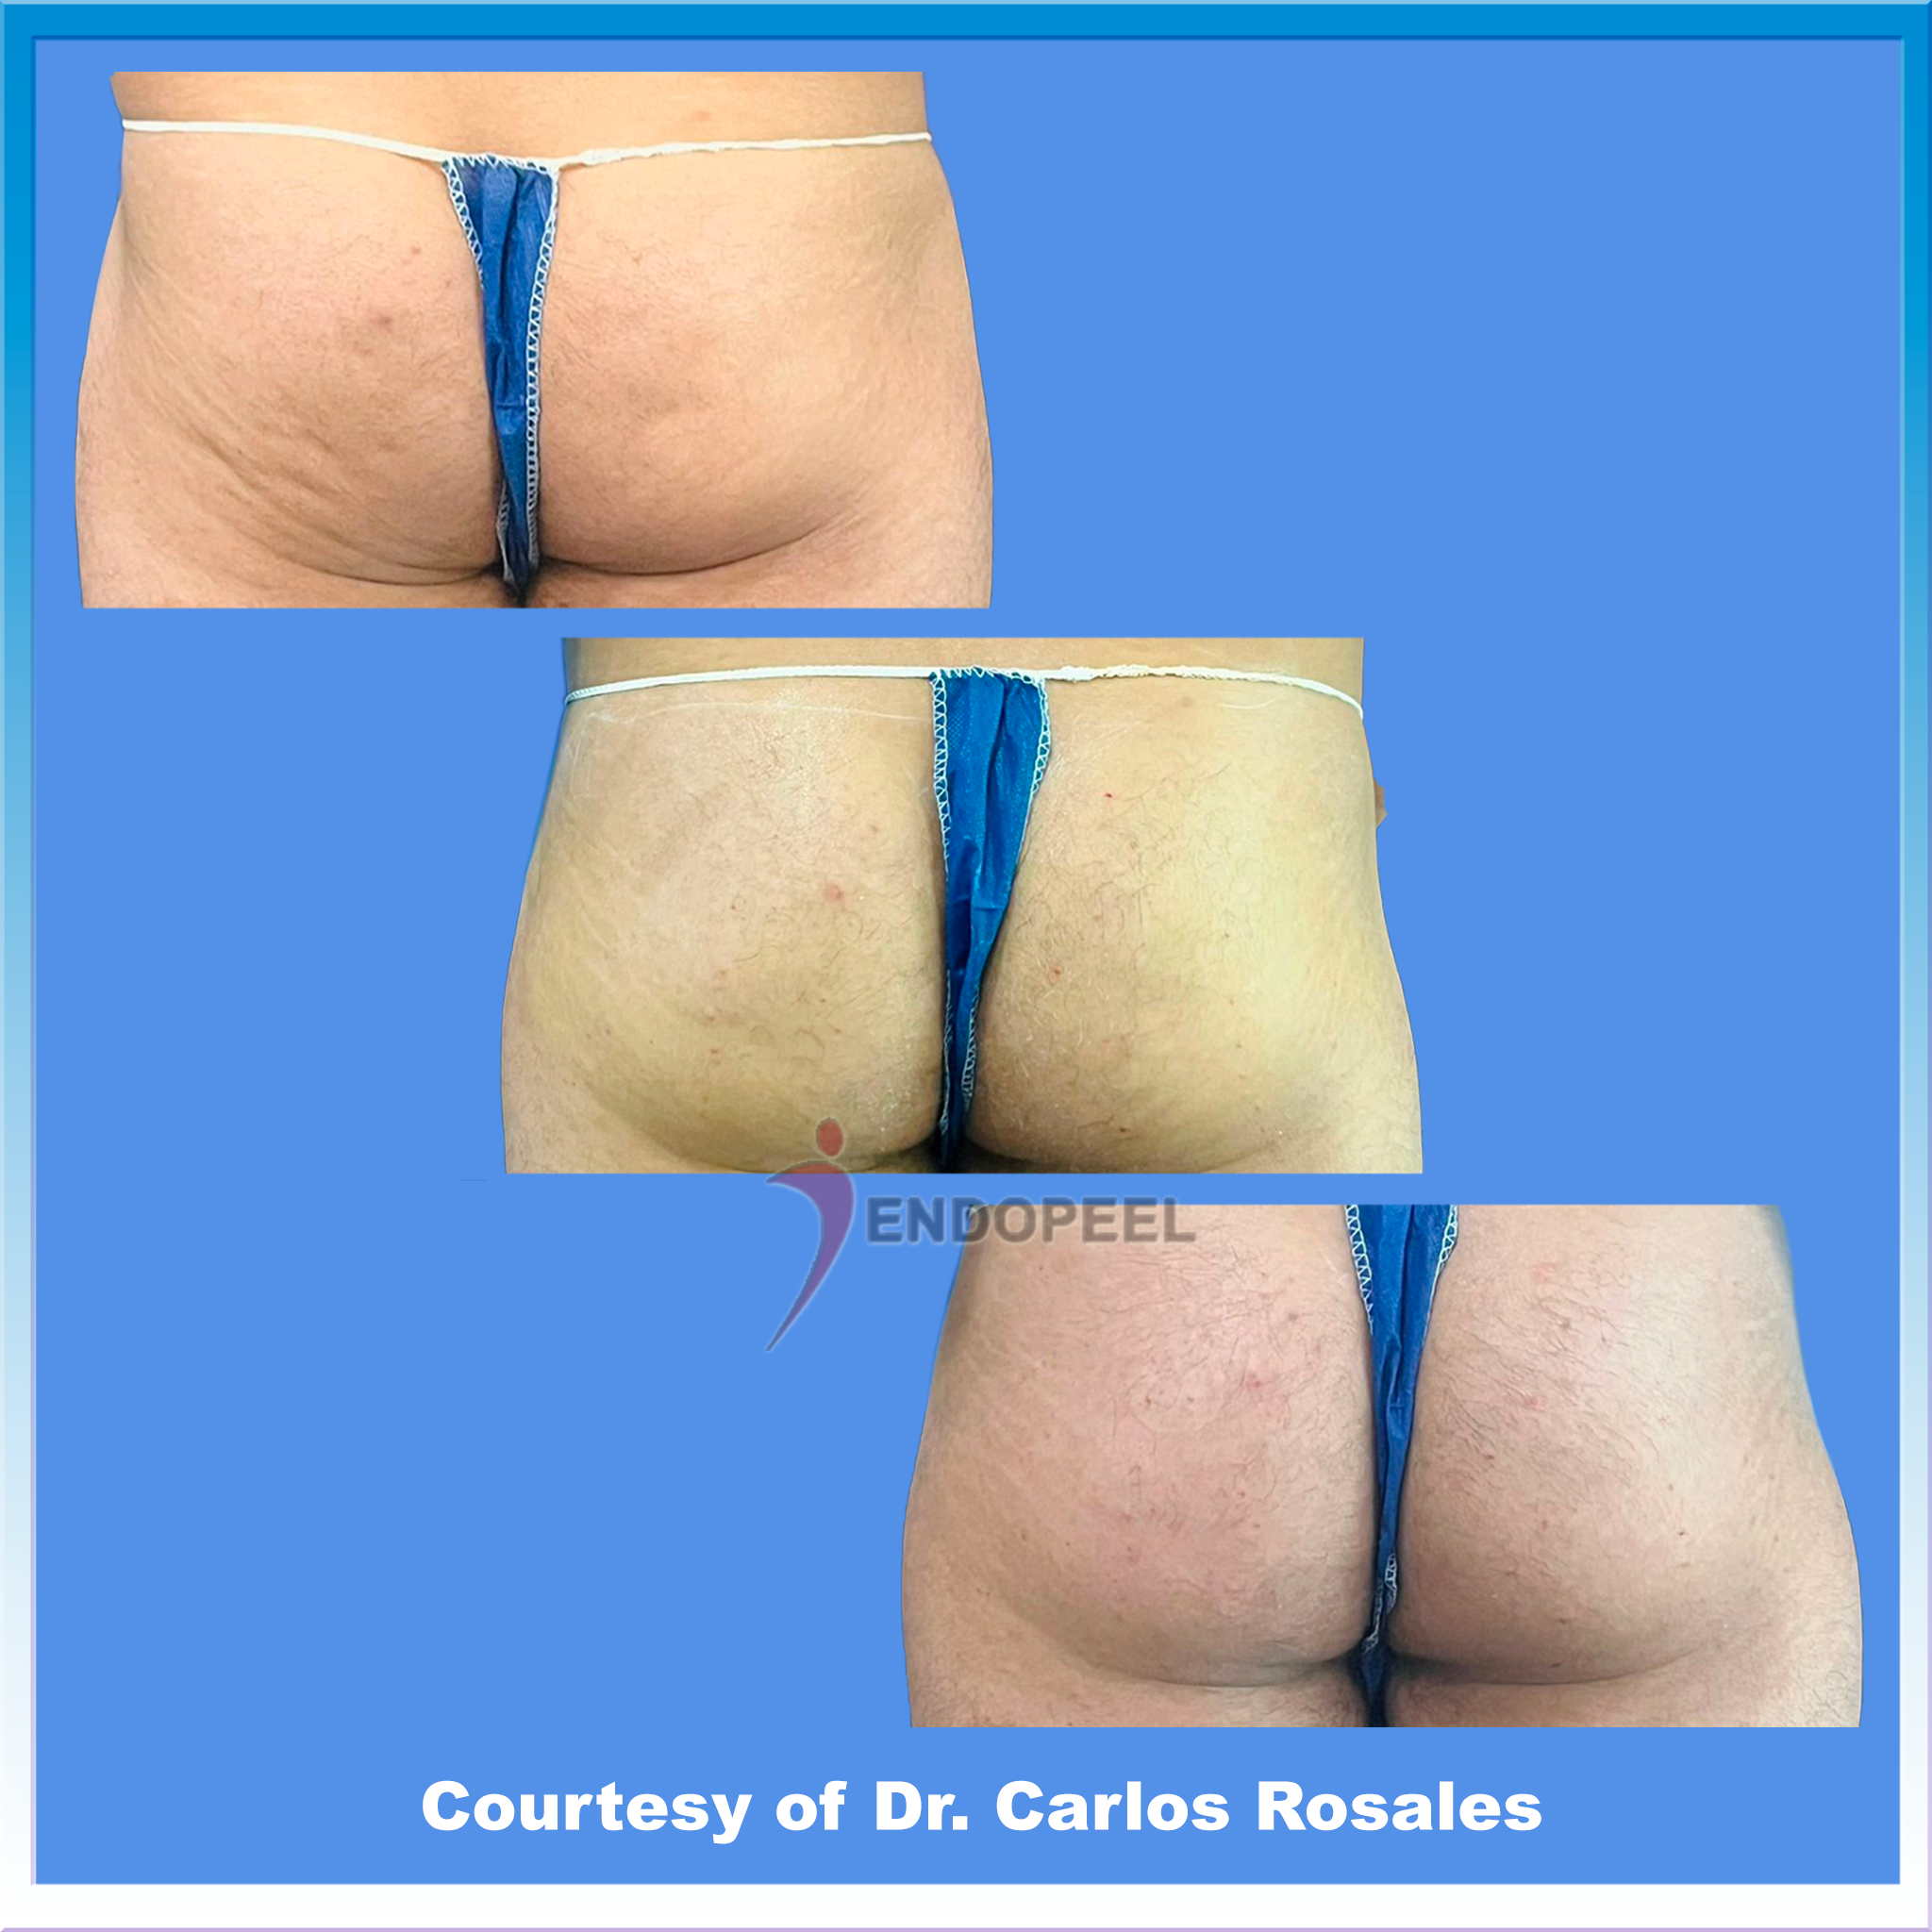 evolution of butts after endopeel treatment of a mature man